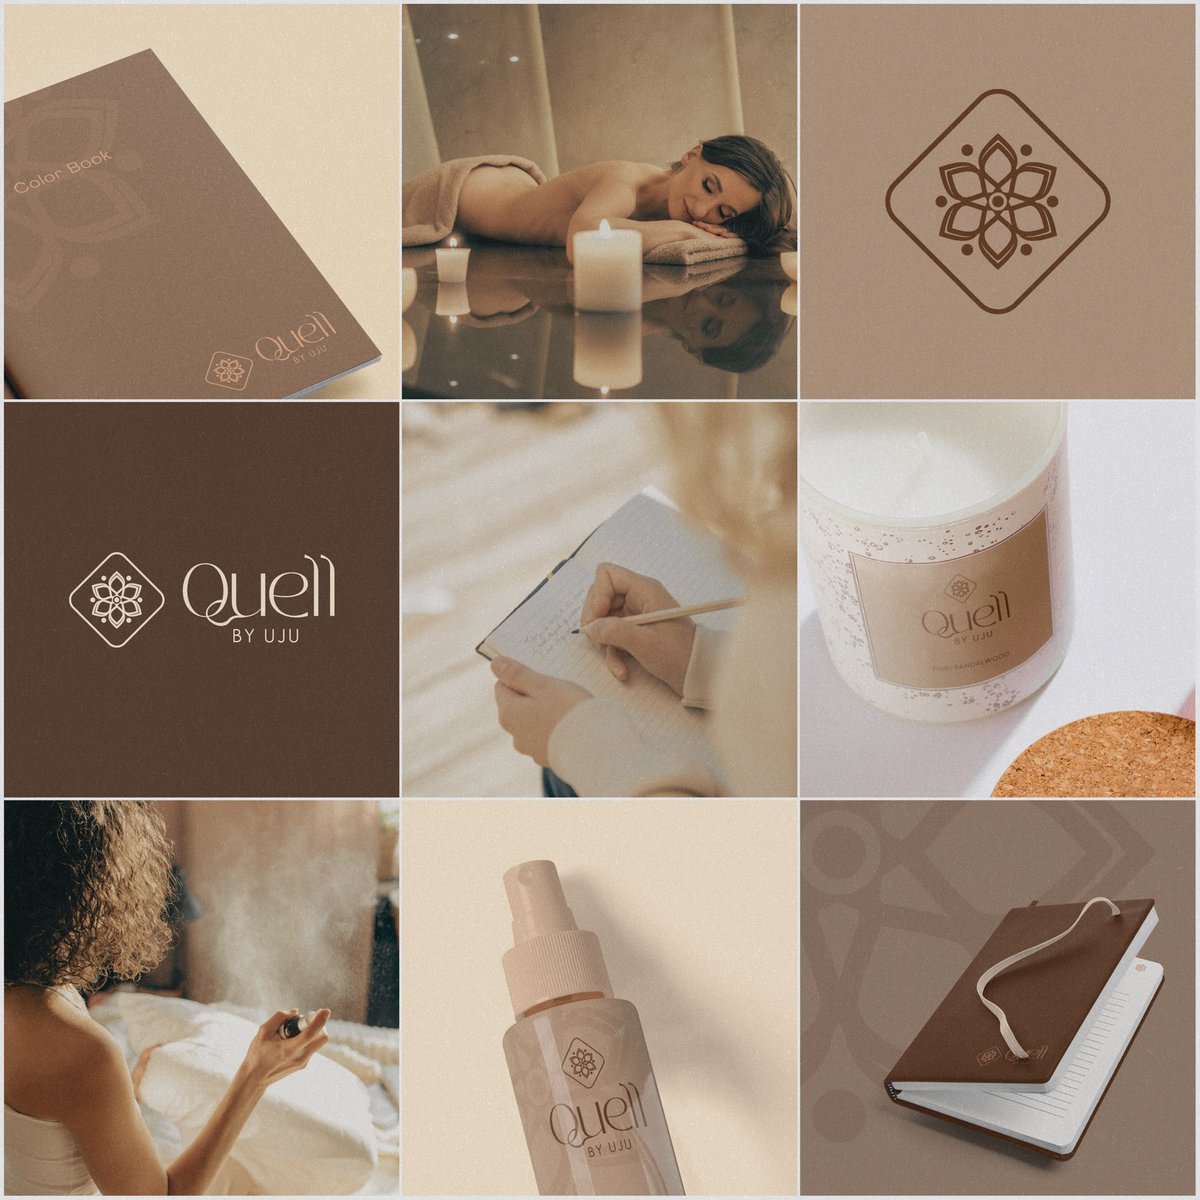 Brand Identity design for QUELL BY UJU. 

An Aromatherapy brand that offers aroma & therapy products like candles, home mist spray, journals and coloring books, which helps relax and focus your mind and body in a safe way.